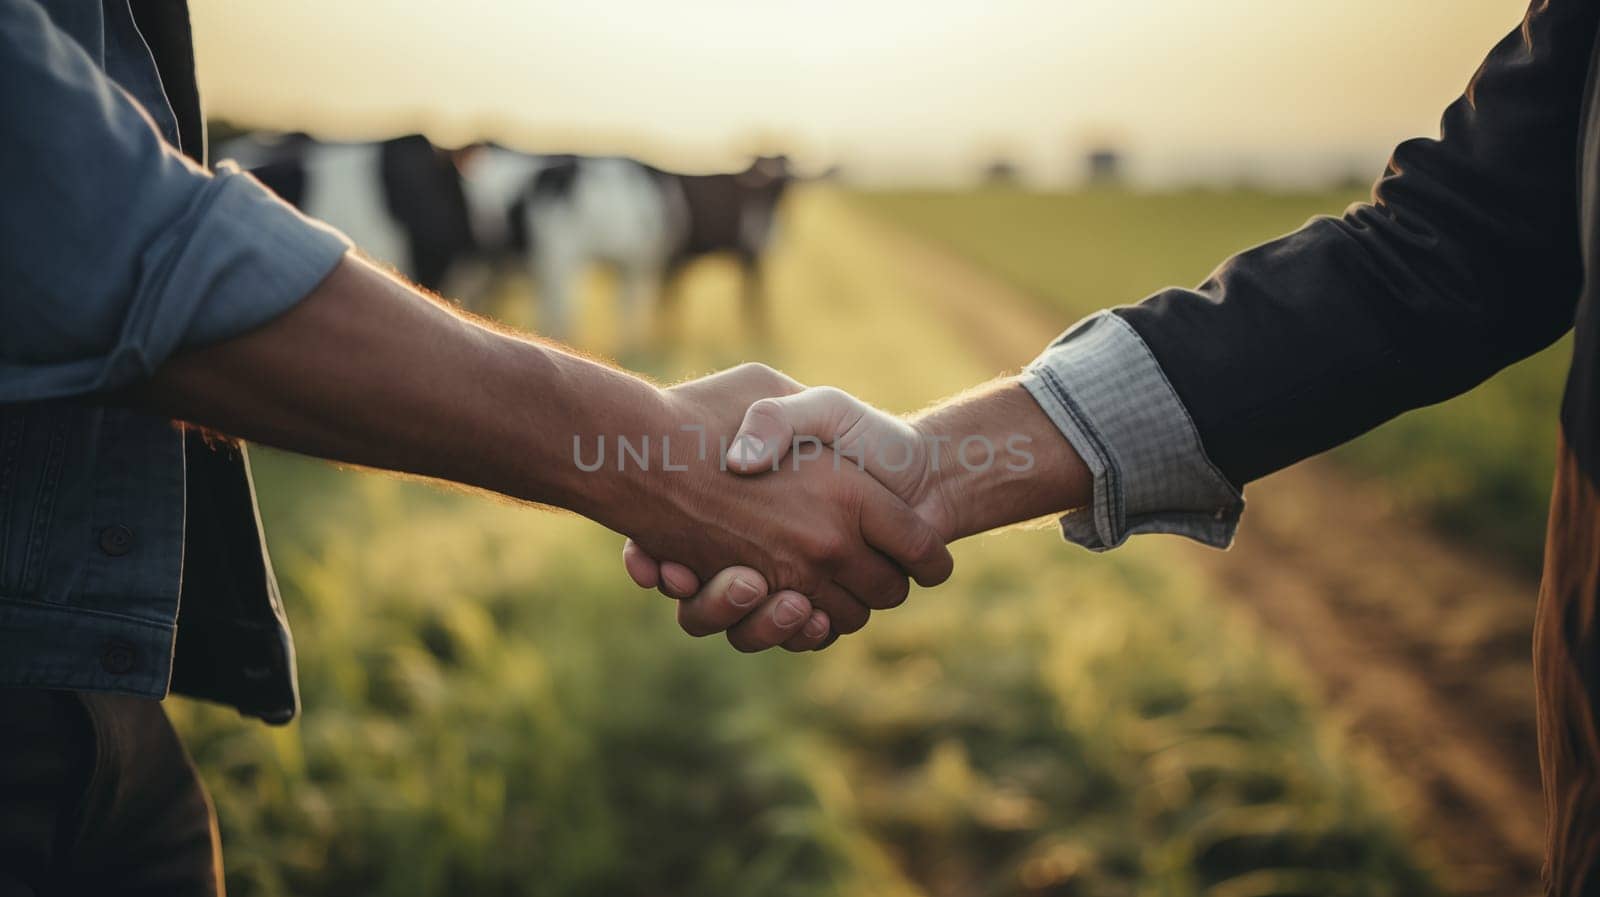 Handshake of two men in shirts against the background of a farmer's field with grazing cows.